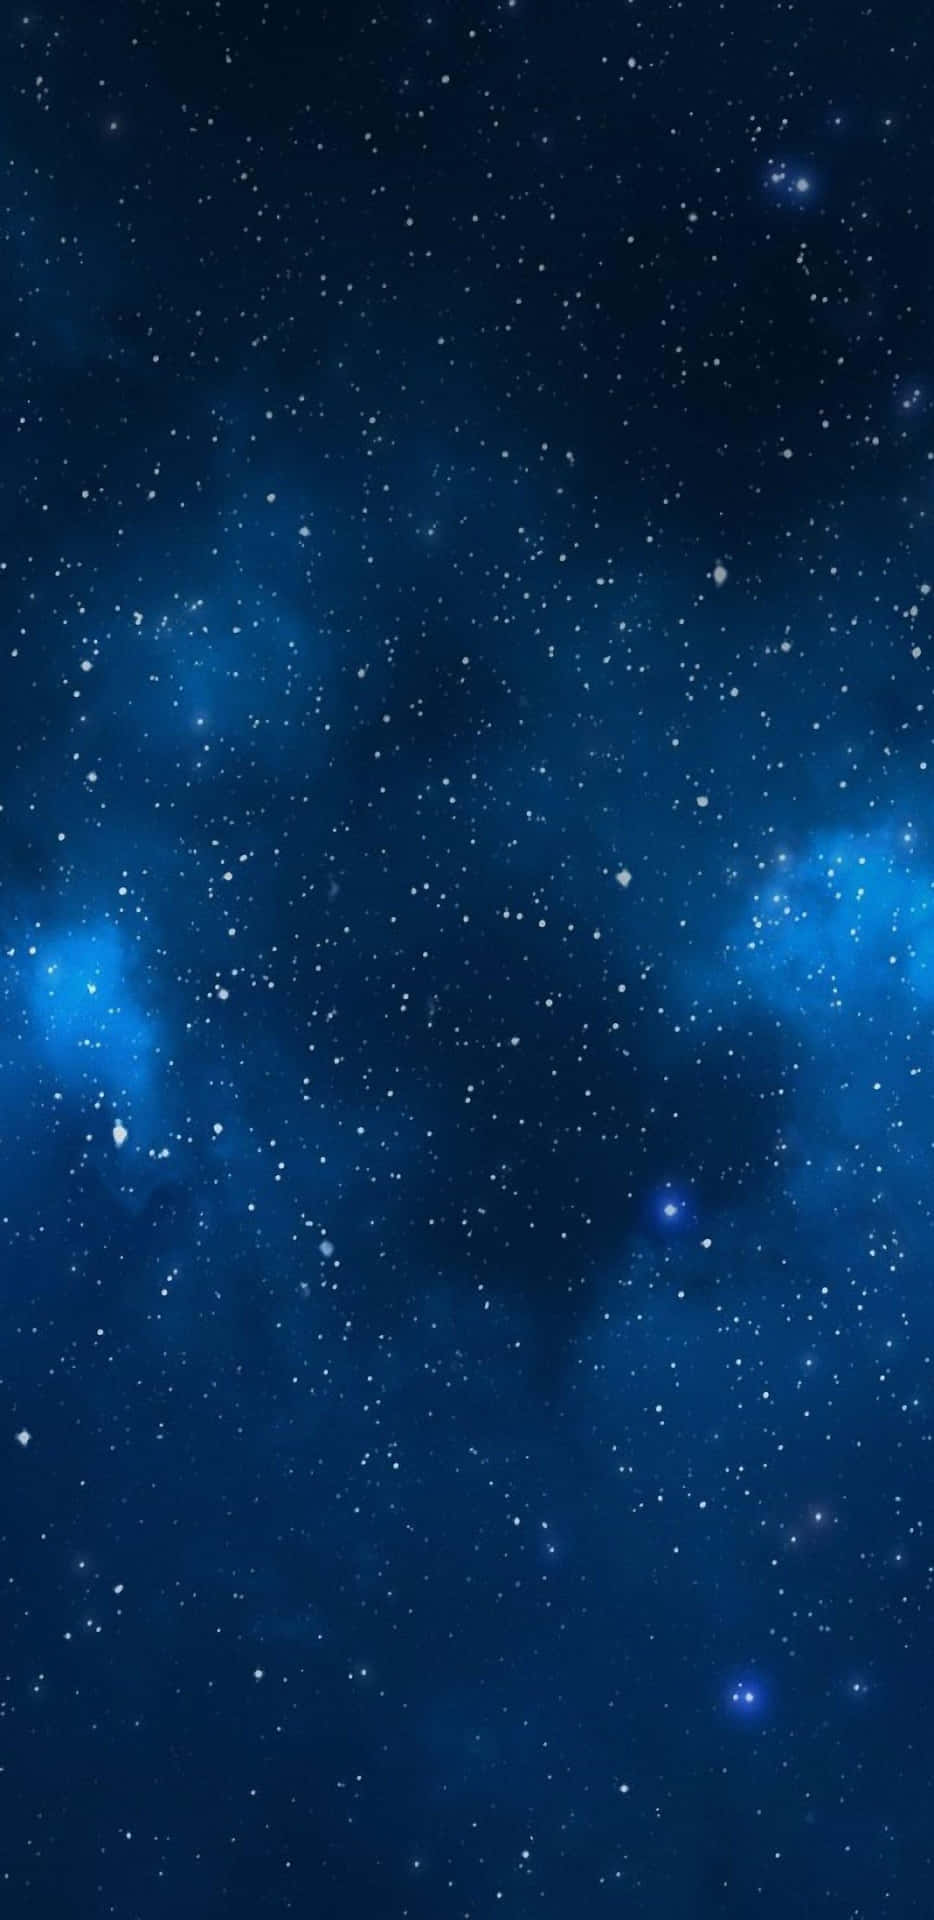 Get your hands on the awesome Blue Galaxy iPhone Wallpaper